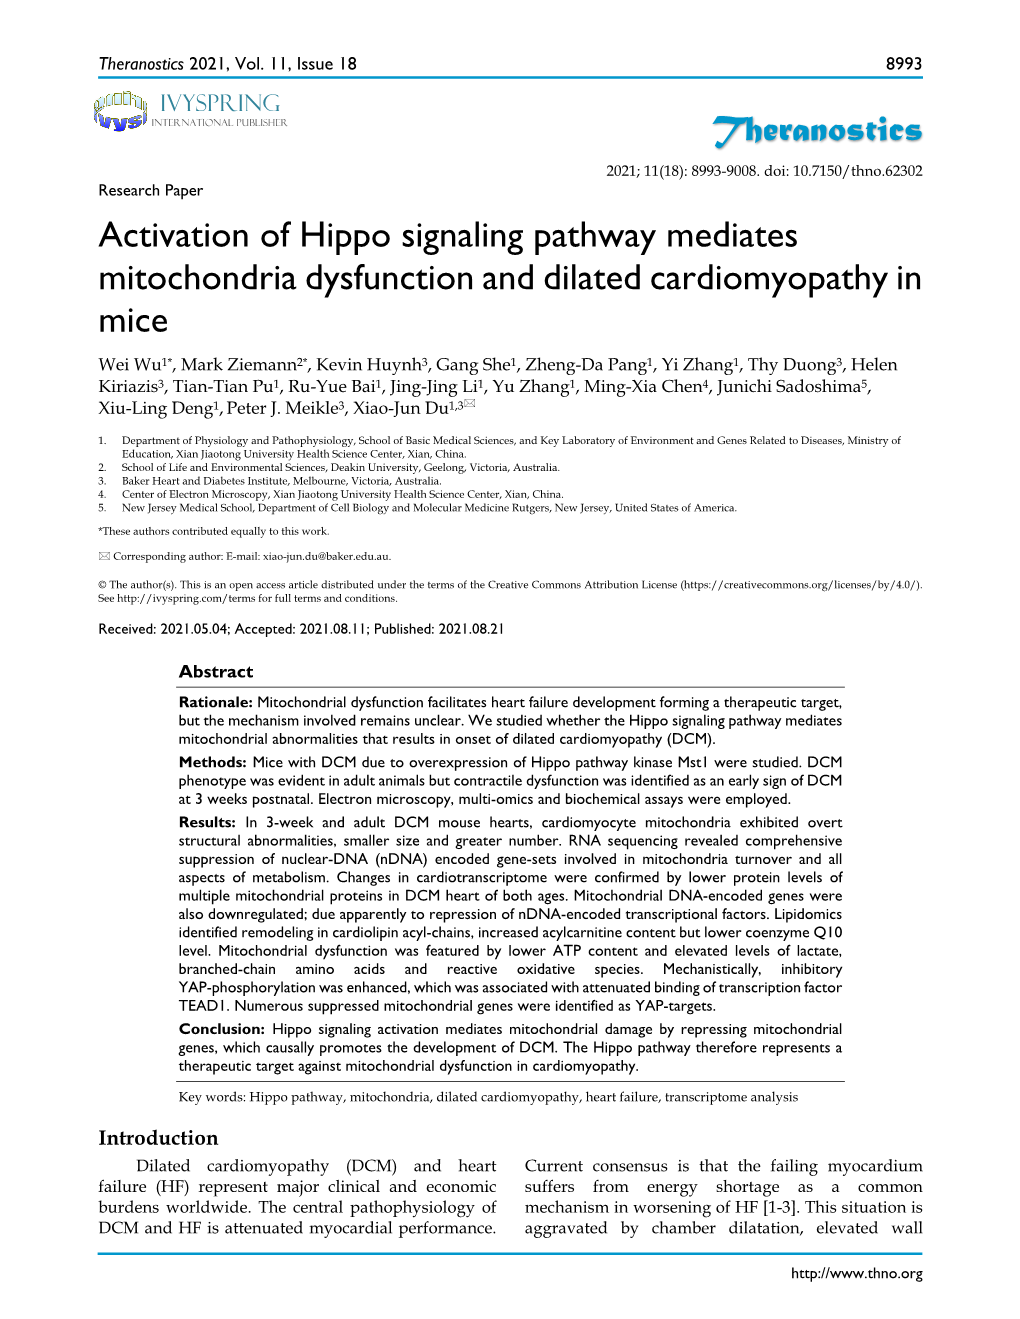 Theranostics Activation of Hippo Signaling Pathway Mediates Mitochondria Dysfunction and Dilated Cardiomyopathy in Mice